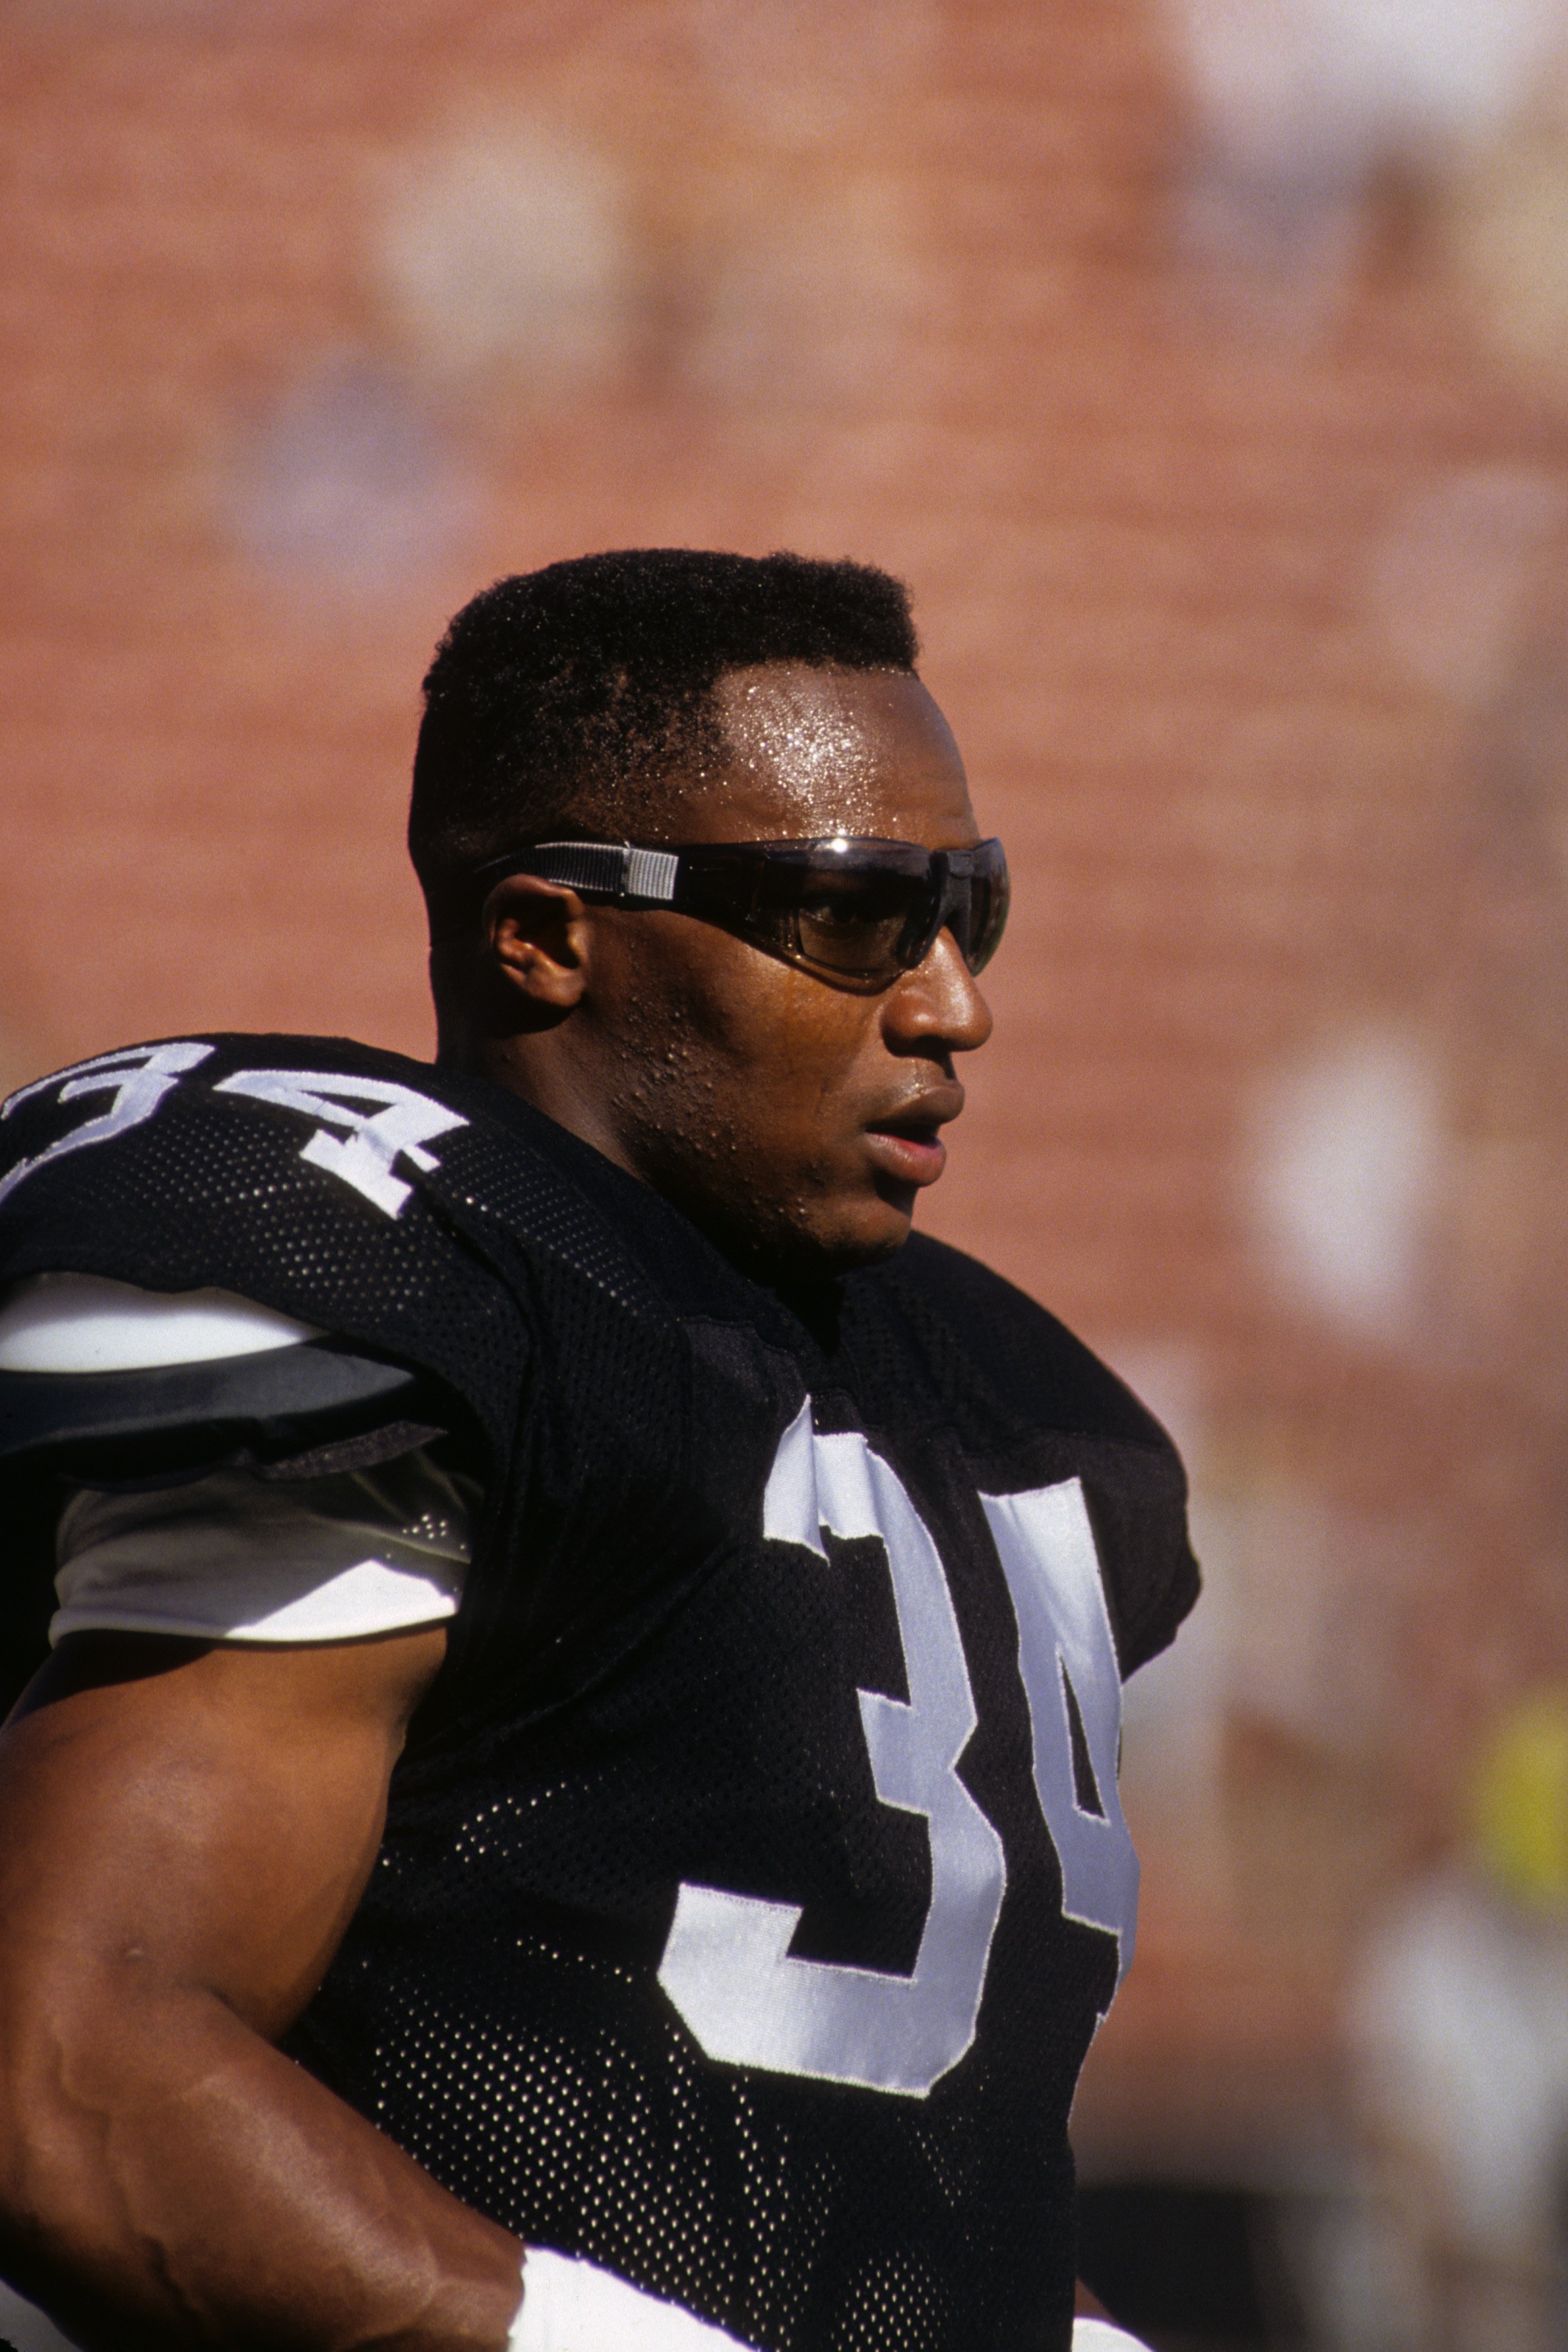 LOS ANGELES - NOVEMBER 11:  Running back Bo Jackson #34 of the Los Angeles Raiders looks on during a game against the Green Bay Packers at the Los Angeles Memorial Coliseum on November 11, 1990 in Los Angeles, California.  The Packers won 29-16.  (Photo b